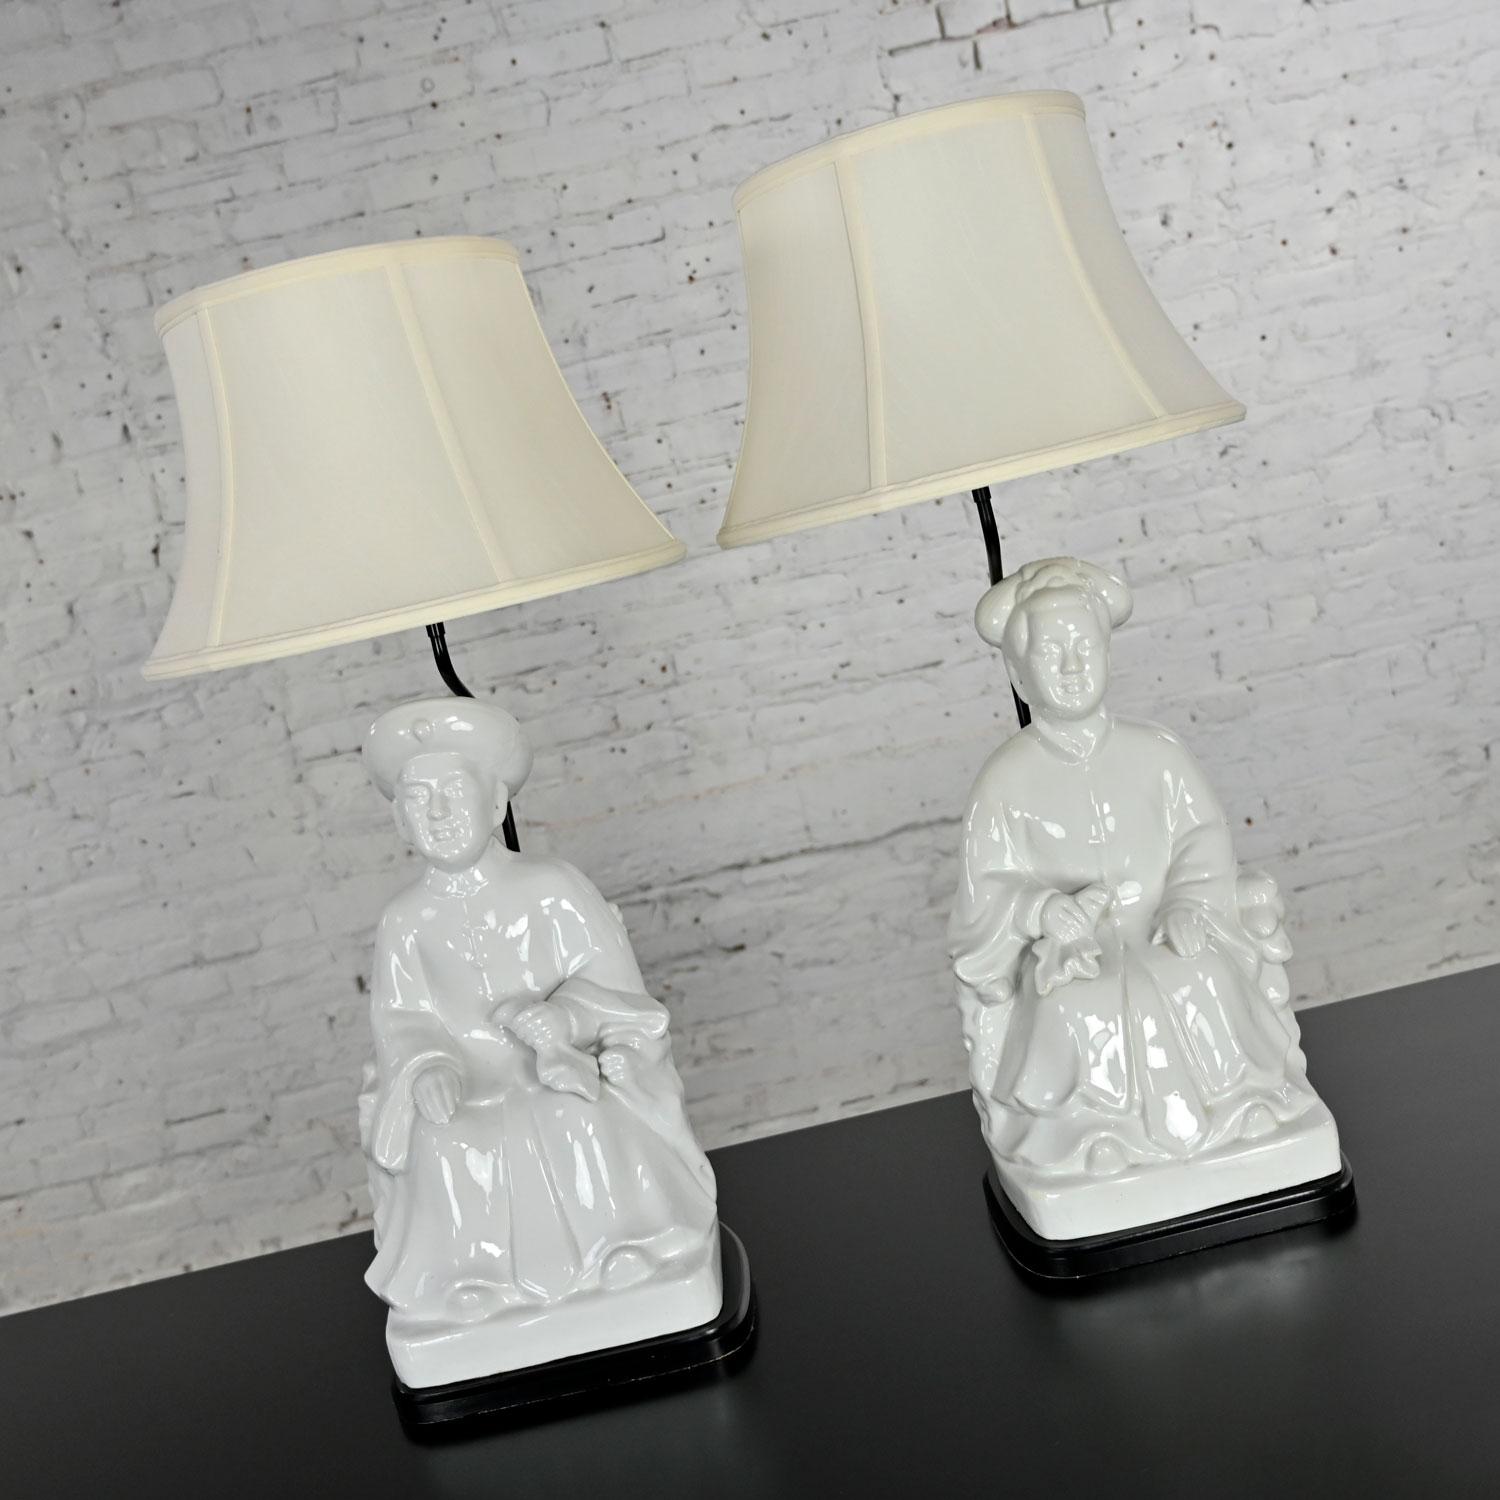 Fabulous vintage white porcelain Blanc De Chine large scale Asian figure chinoiserie pair of lamps with off-white silk-like bell shades and black bases. Beautiful condition, keeping in mind that these are vintage and not new so will have signs of